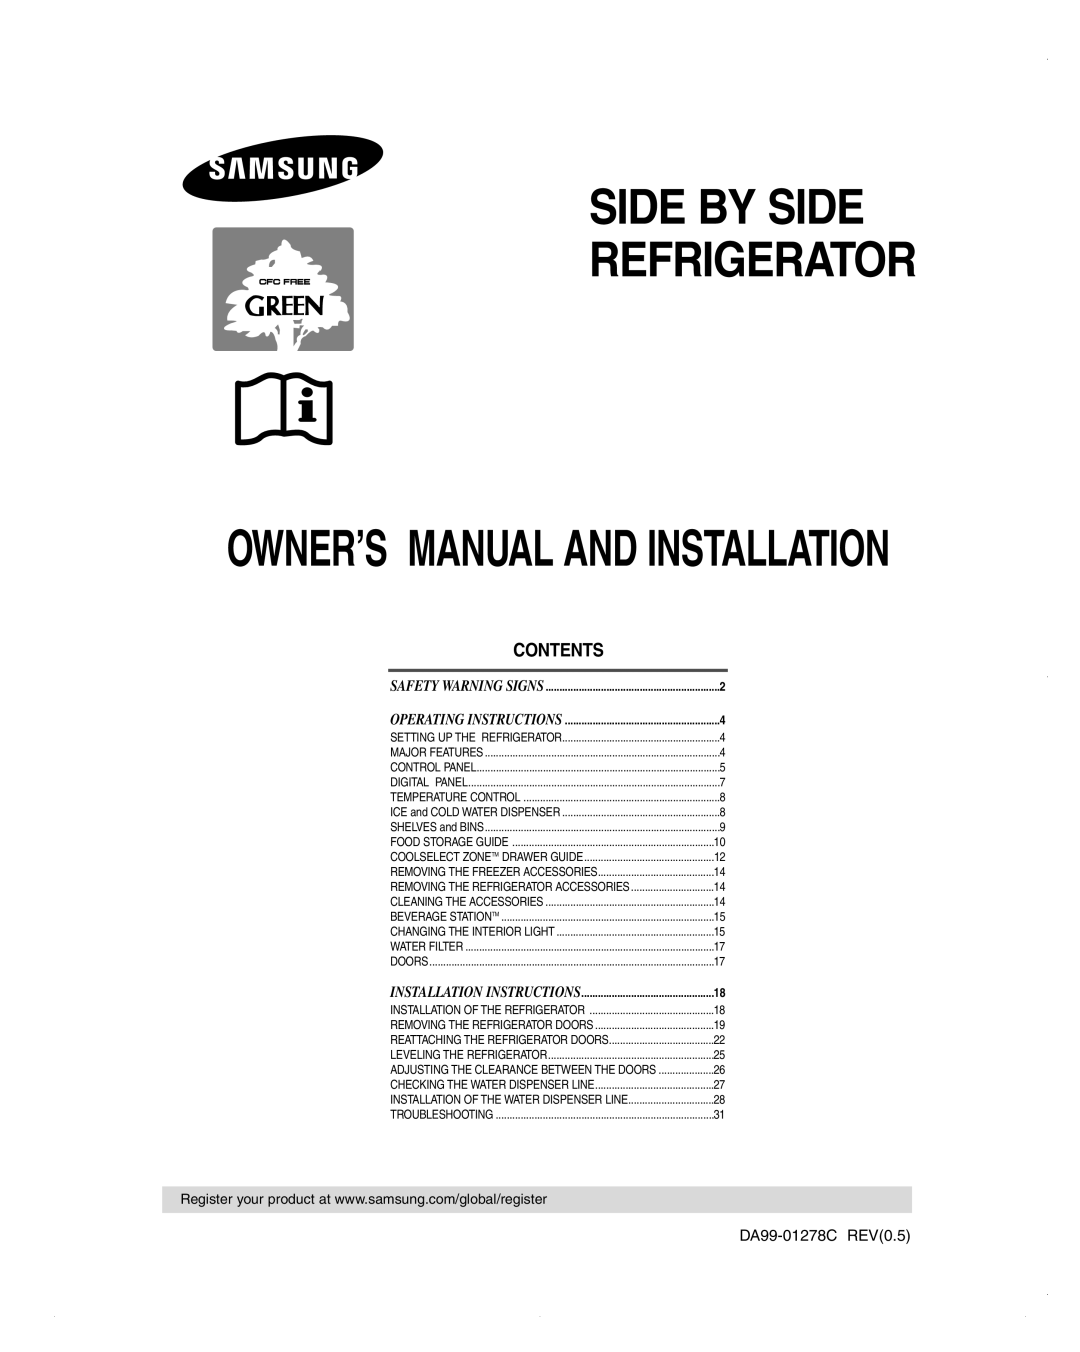 Samsung DA99-01278C owner manual Contents, Side By Side Refrigerator 